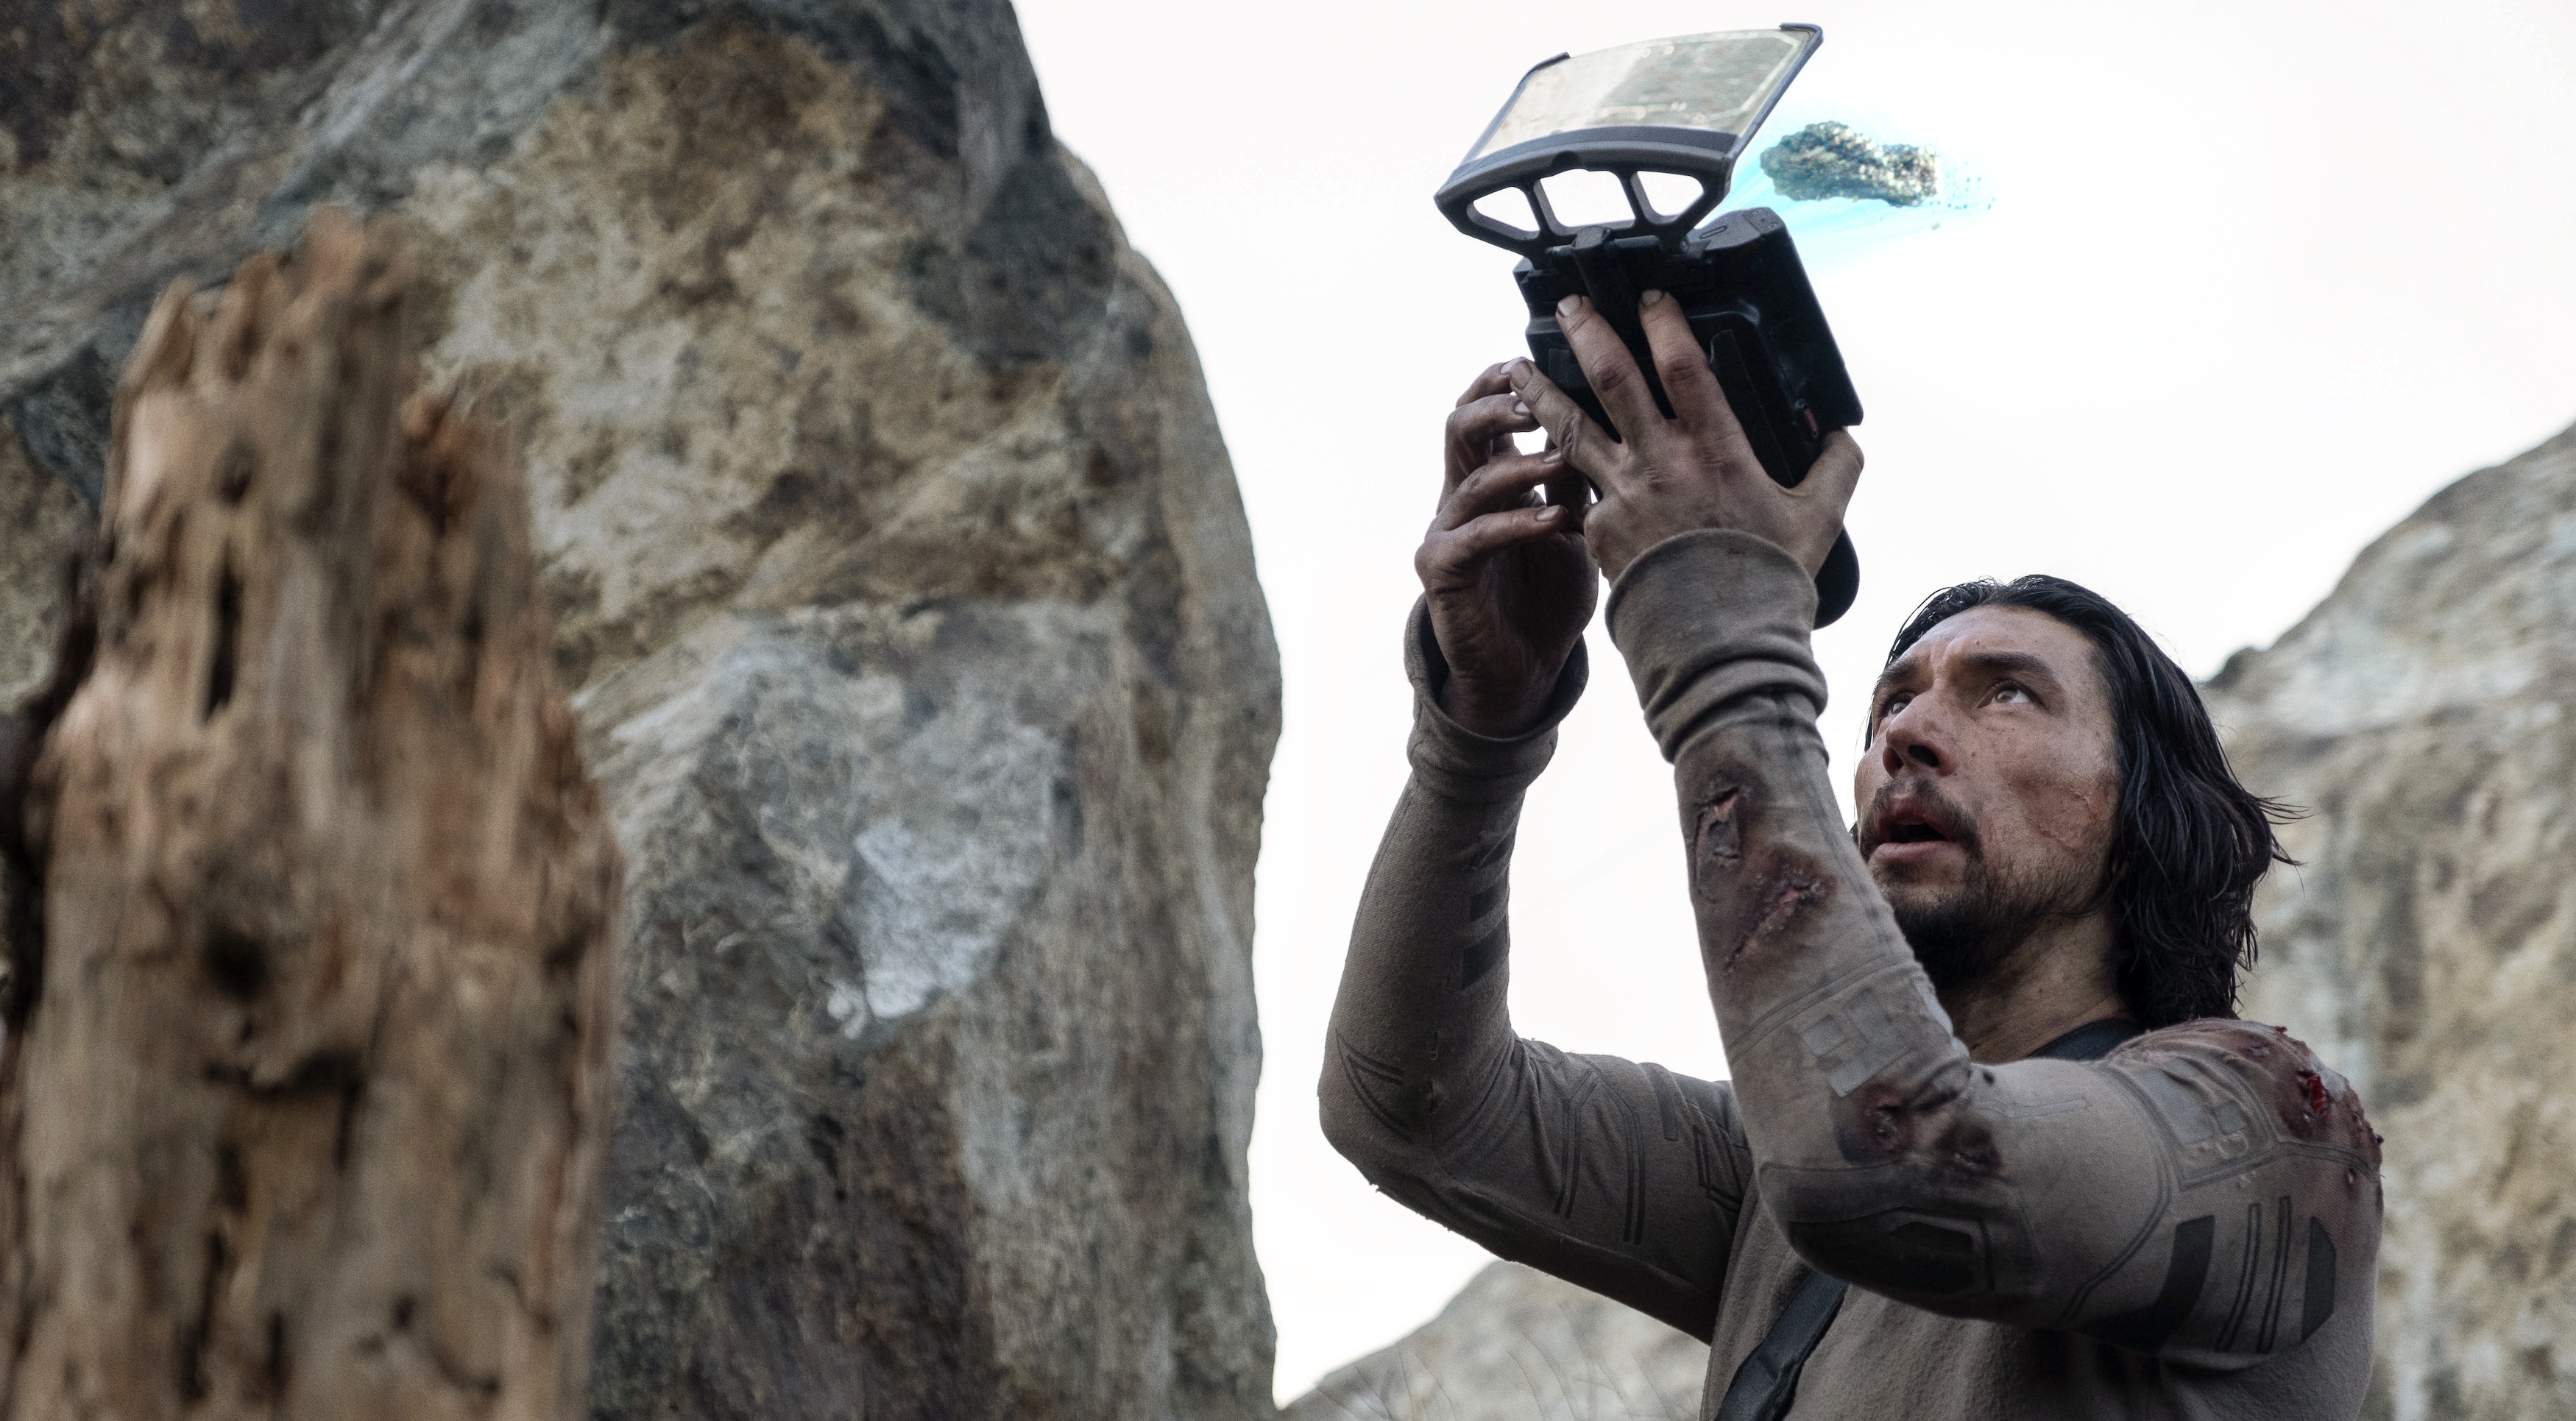 Mills (Adam Driver), a space trucker stranded on Earth, looks grubby and wounded as he stands by a giant rock and holds up a small, boxy device thats projecting a small hologram of a ship image in 65